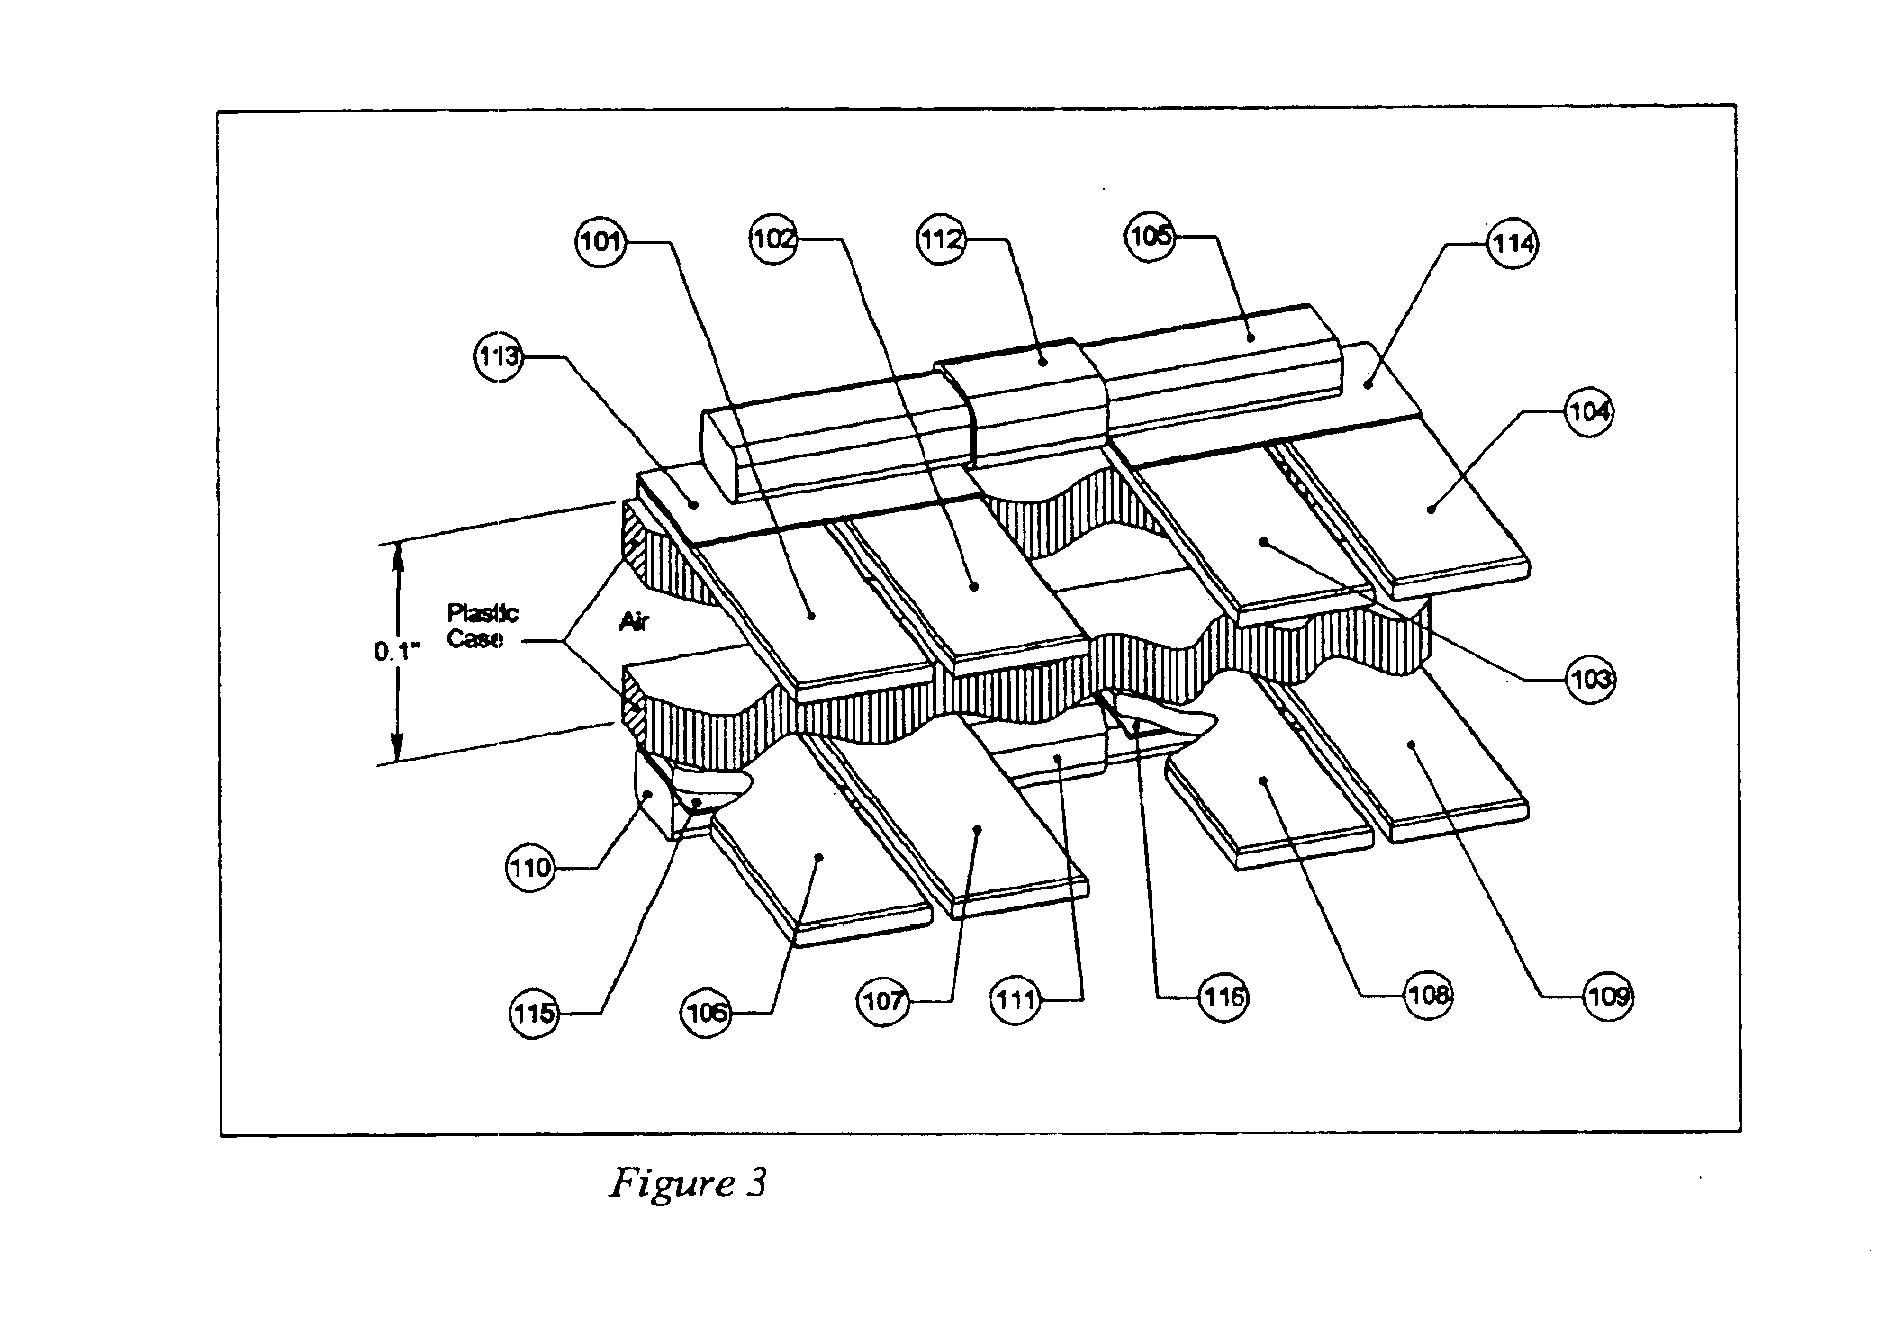 Electrically isolated power and data coupling system suitable for portable and other equipment